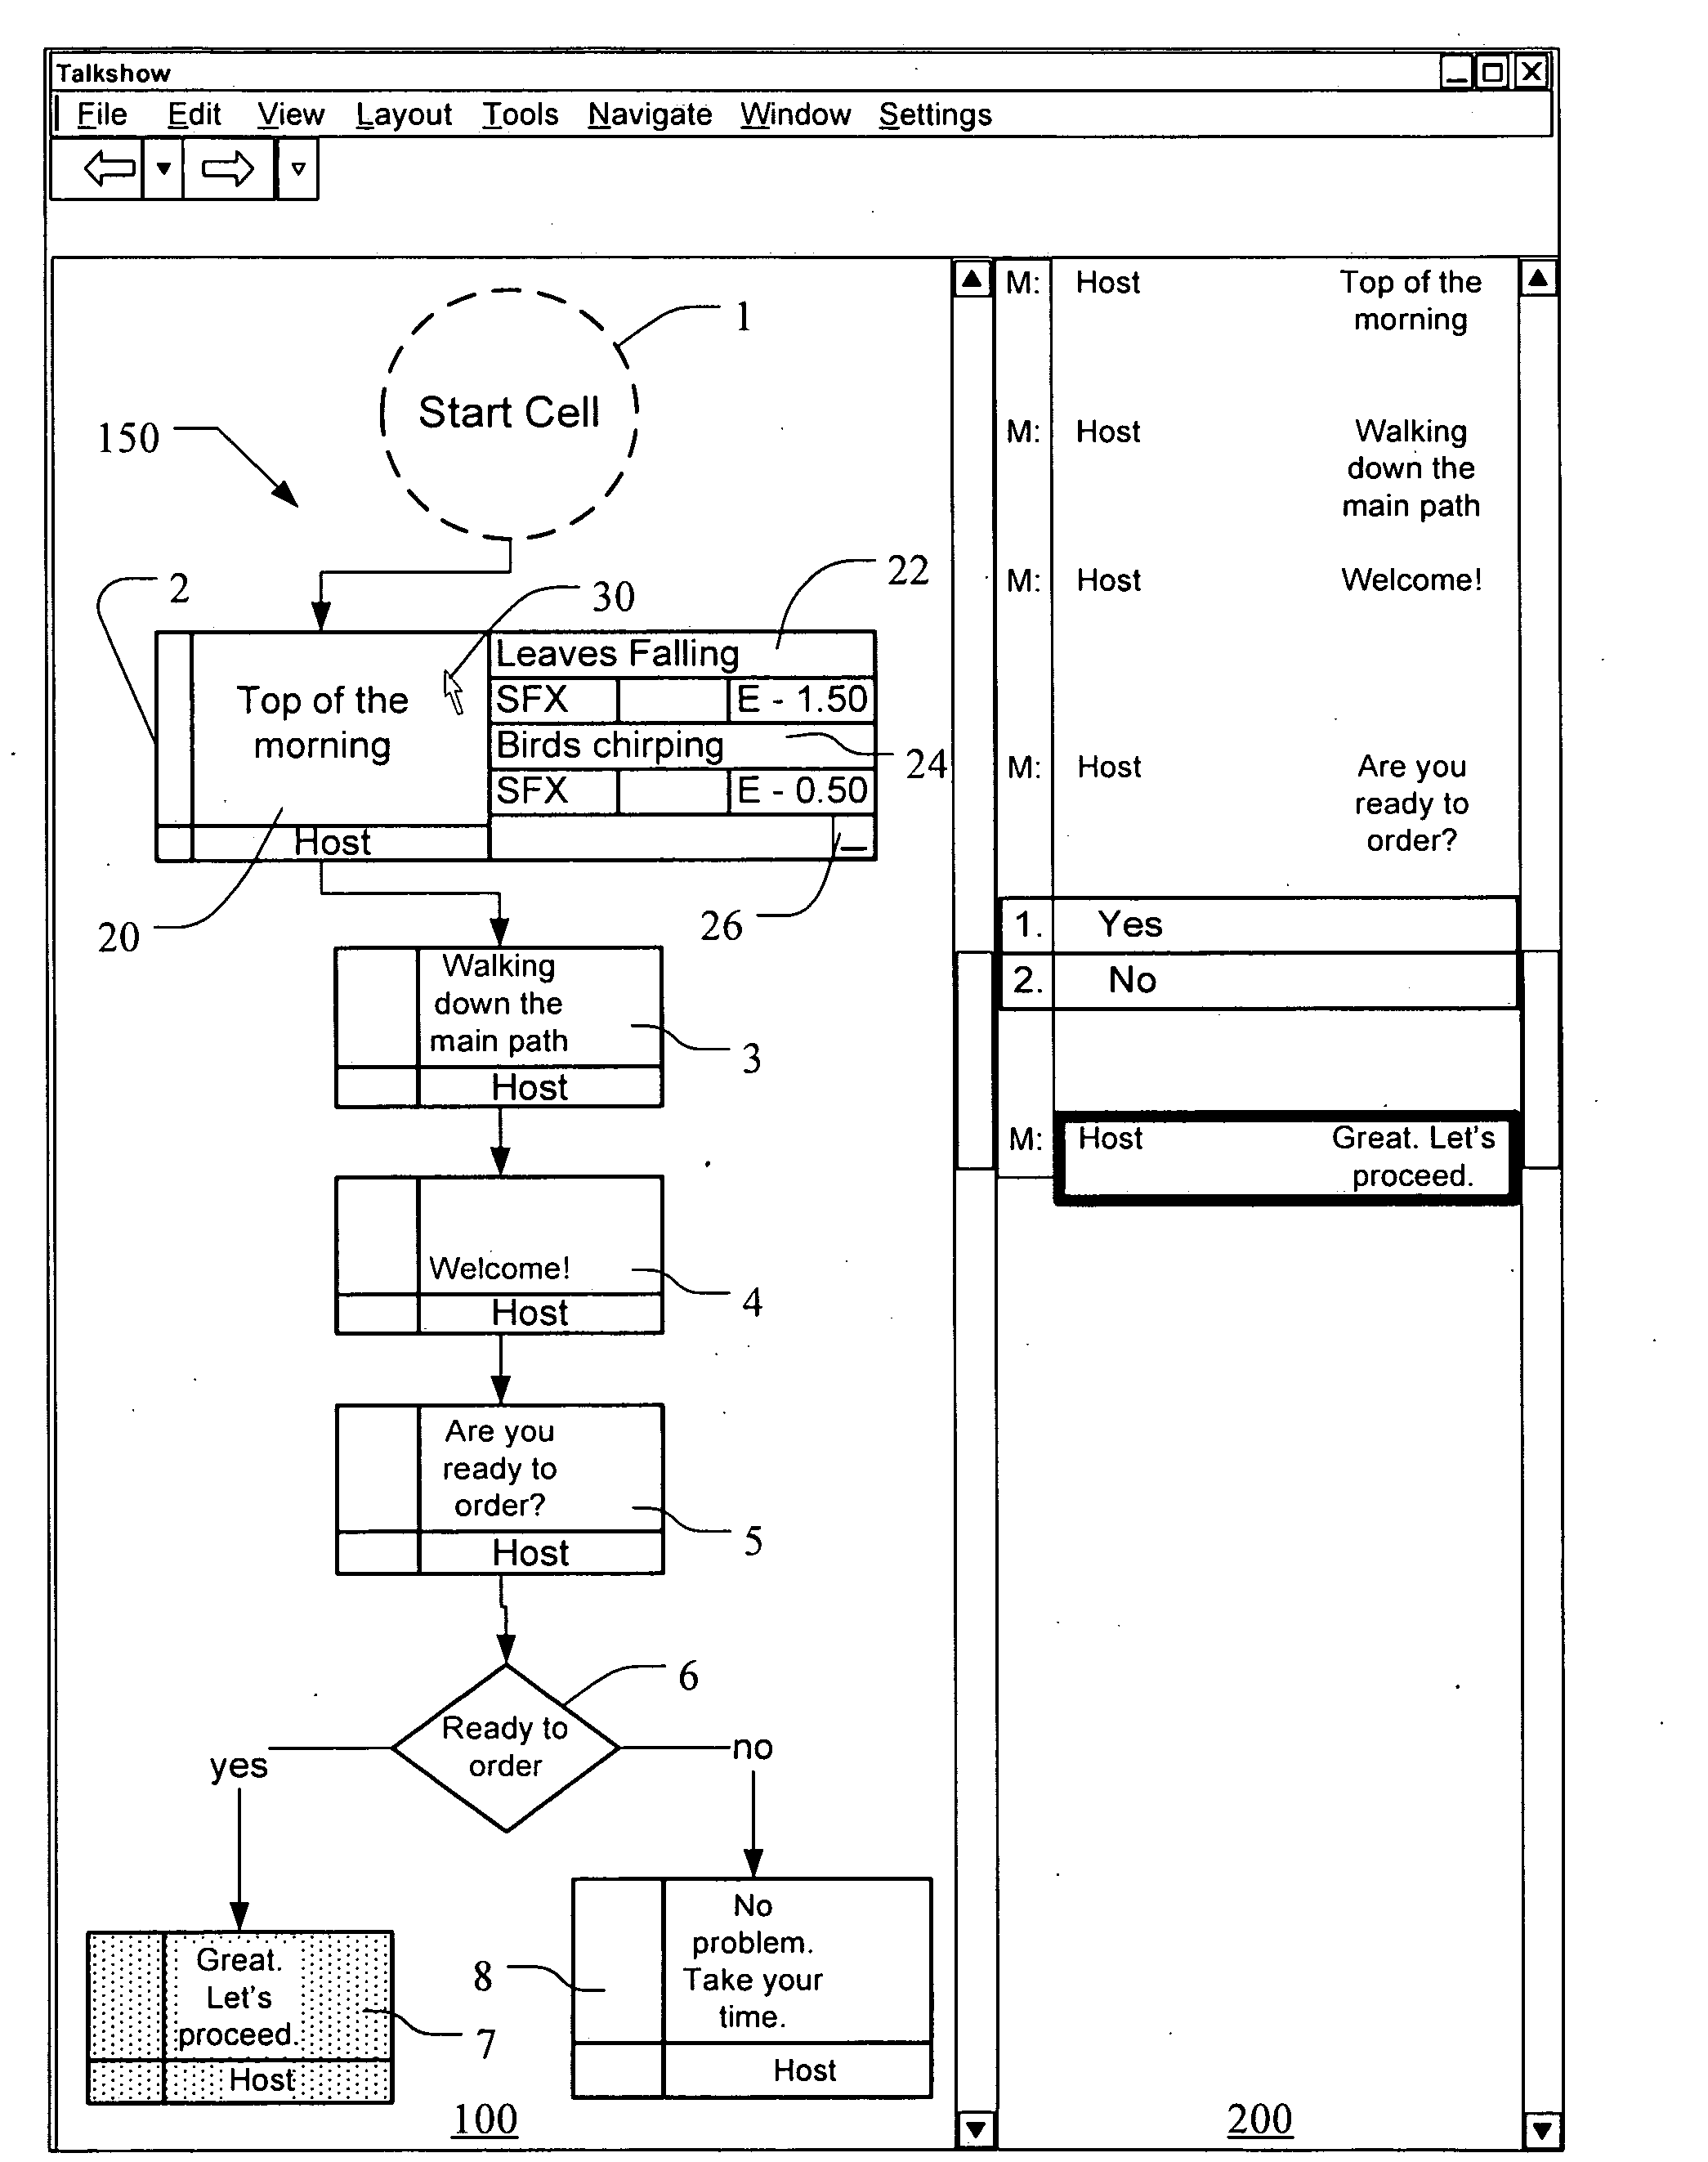 Methods for Identifying Actions in a Flowchart